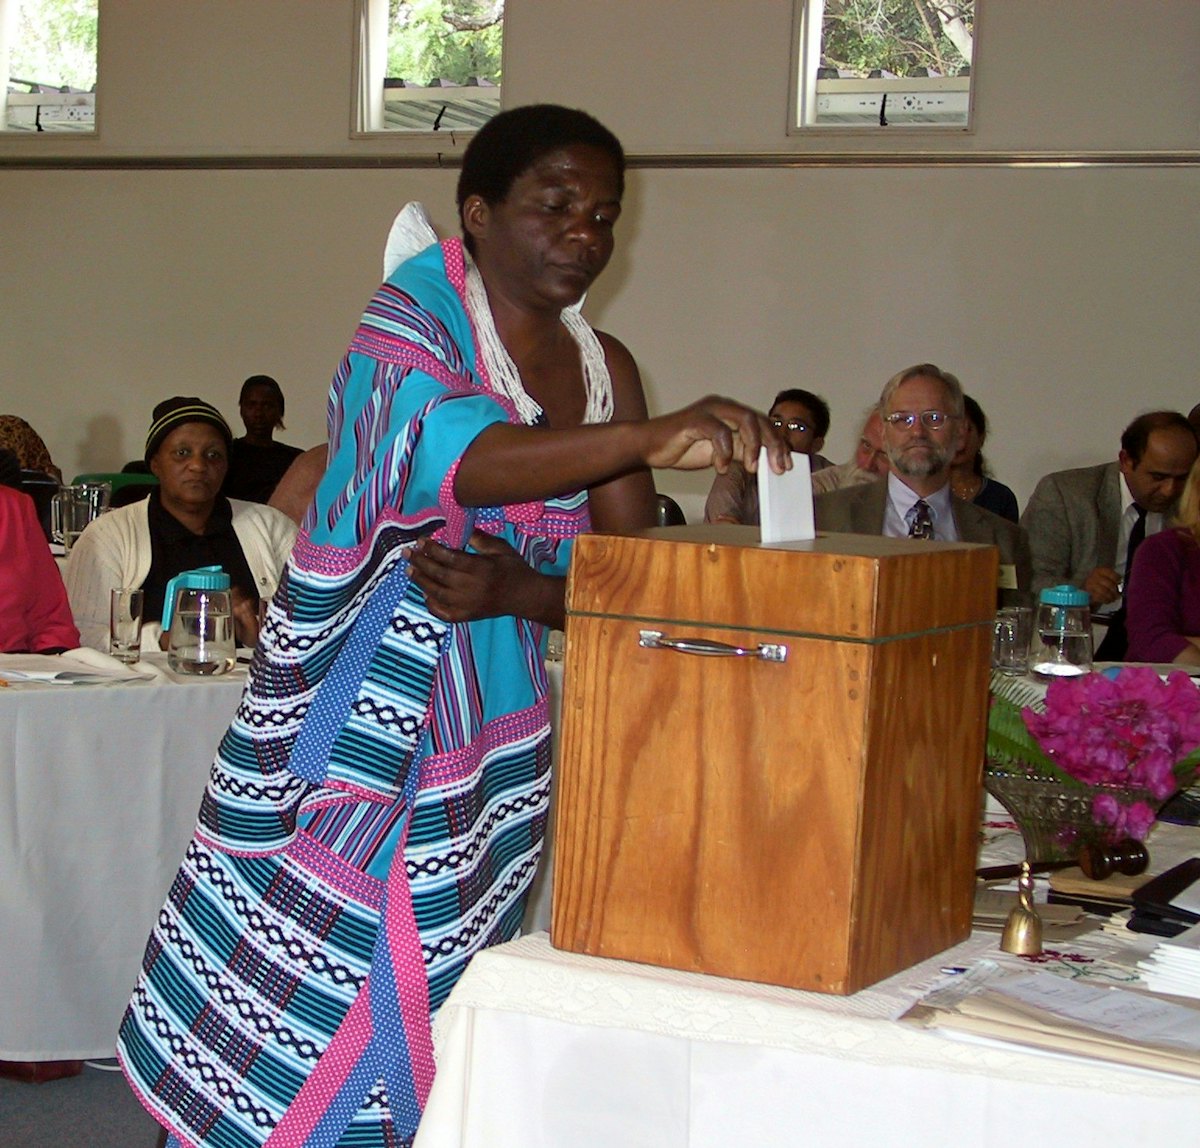 One of the delegates casting her vote in May 2005 for the National Spiritual Assembly of the Baha'is of South Africa.